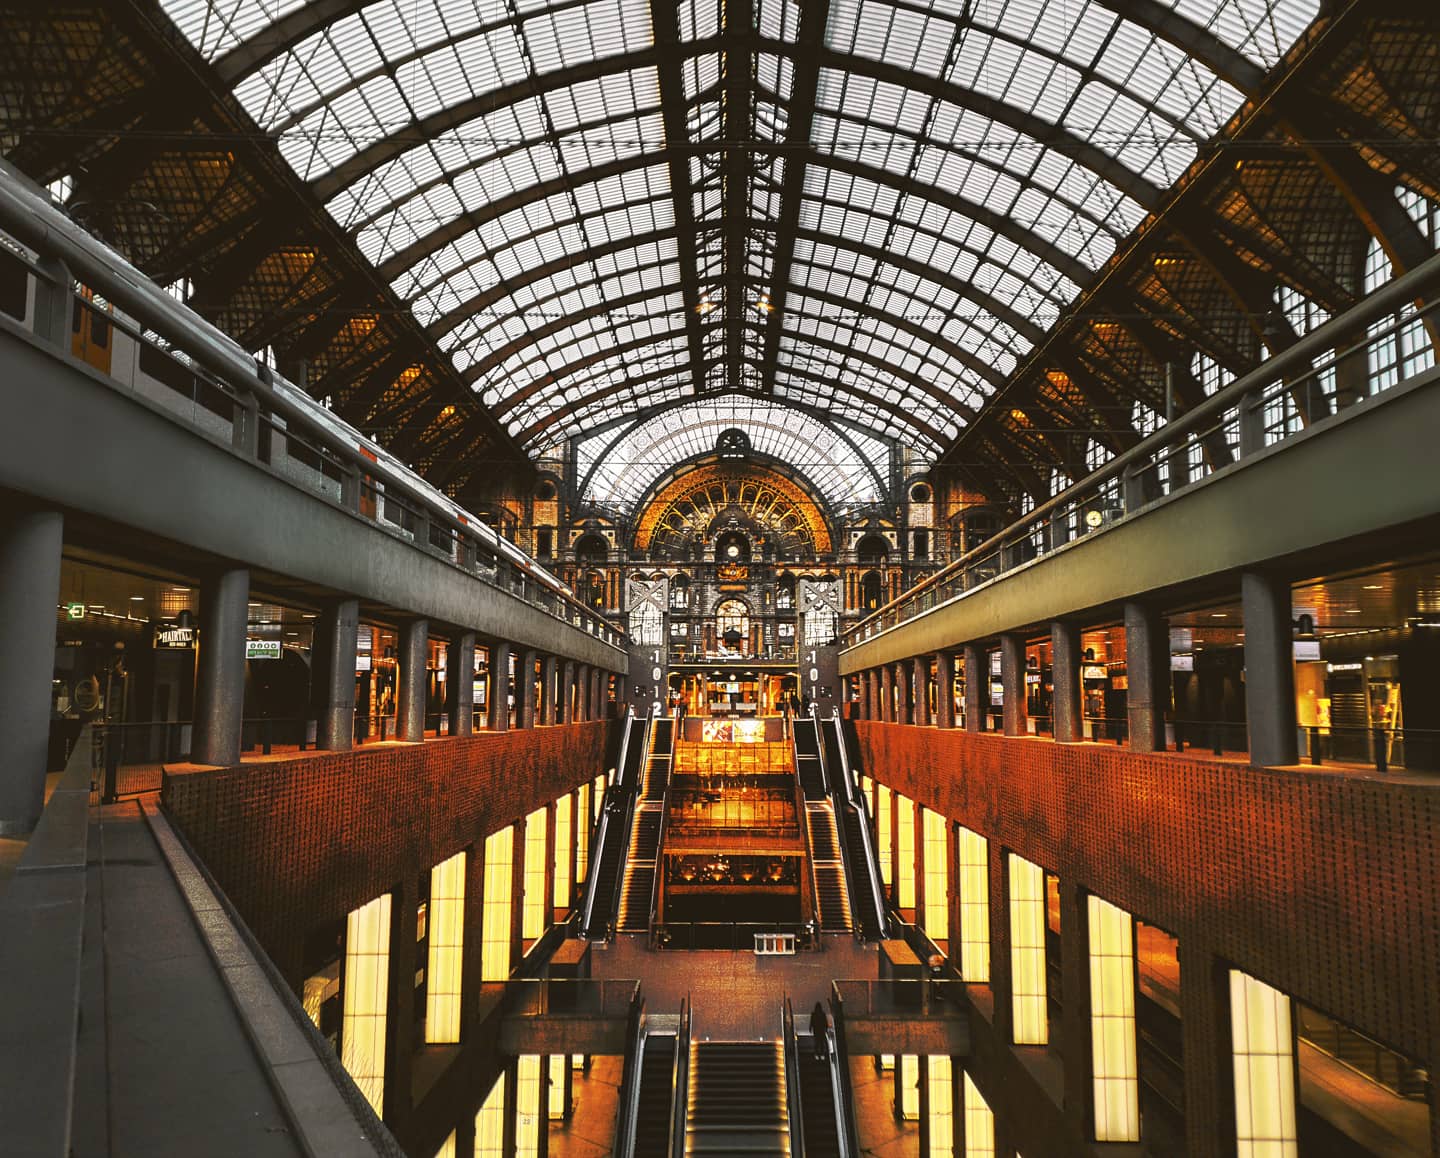 Picture in Antwerp Central Station